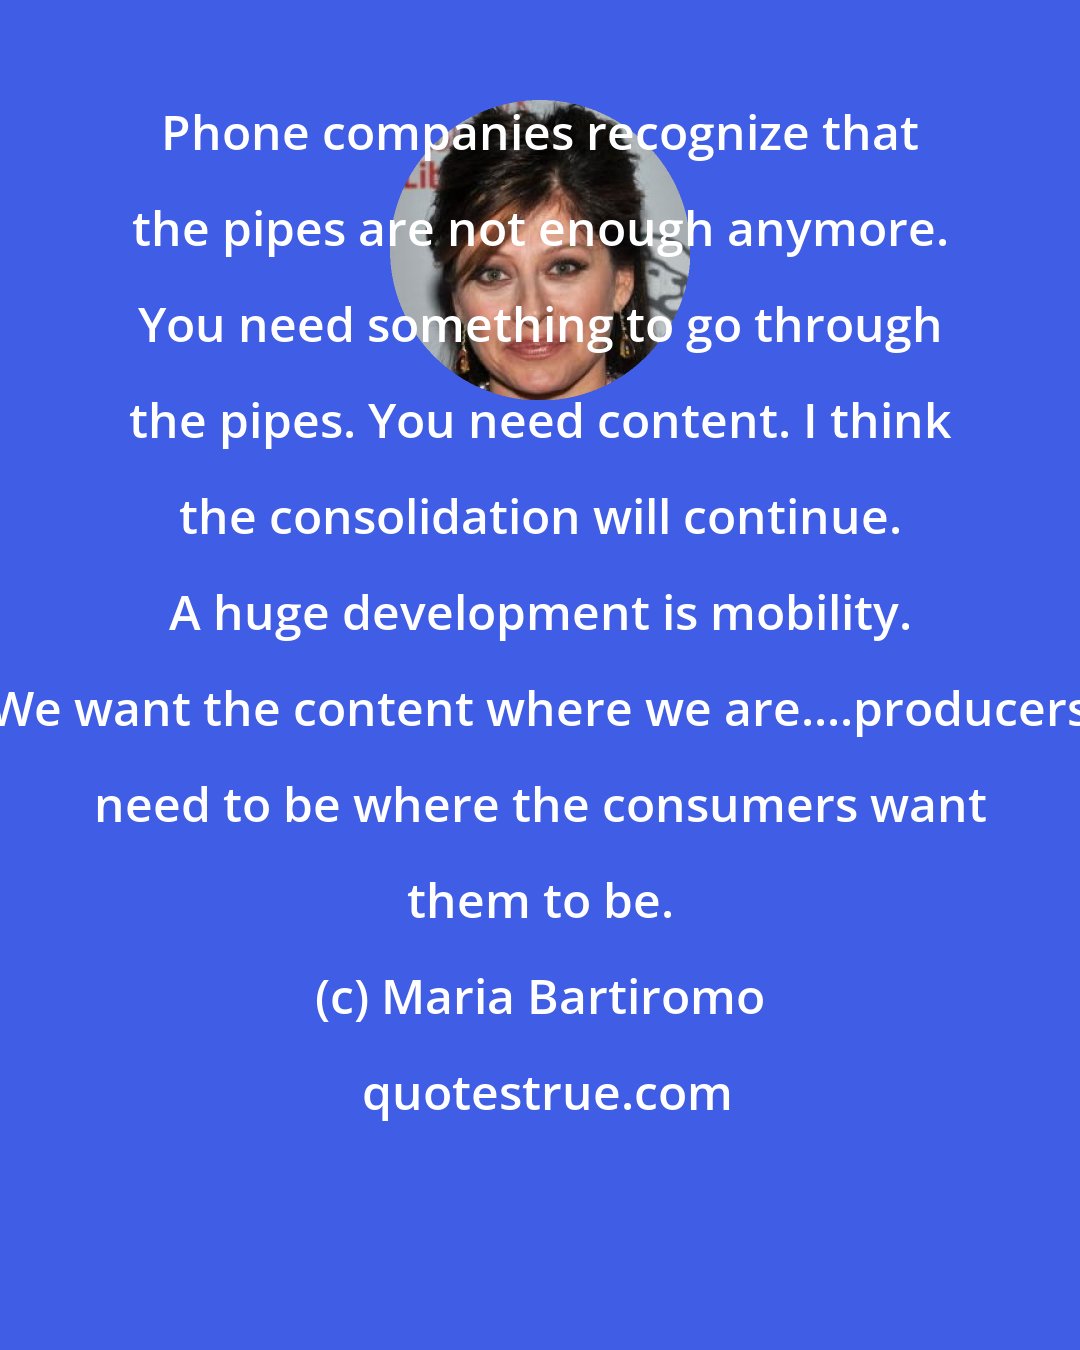 Maria Bartiromo: Phone companies recognize that the pipes are not enough anymore. You need something to go through the pipes. You need content. I think the consolidation will continue. A huge development is mobility. We want the content where we are....producers need to be where the consumers want them to be.